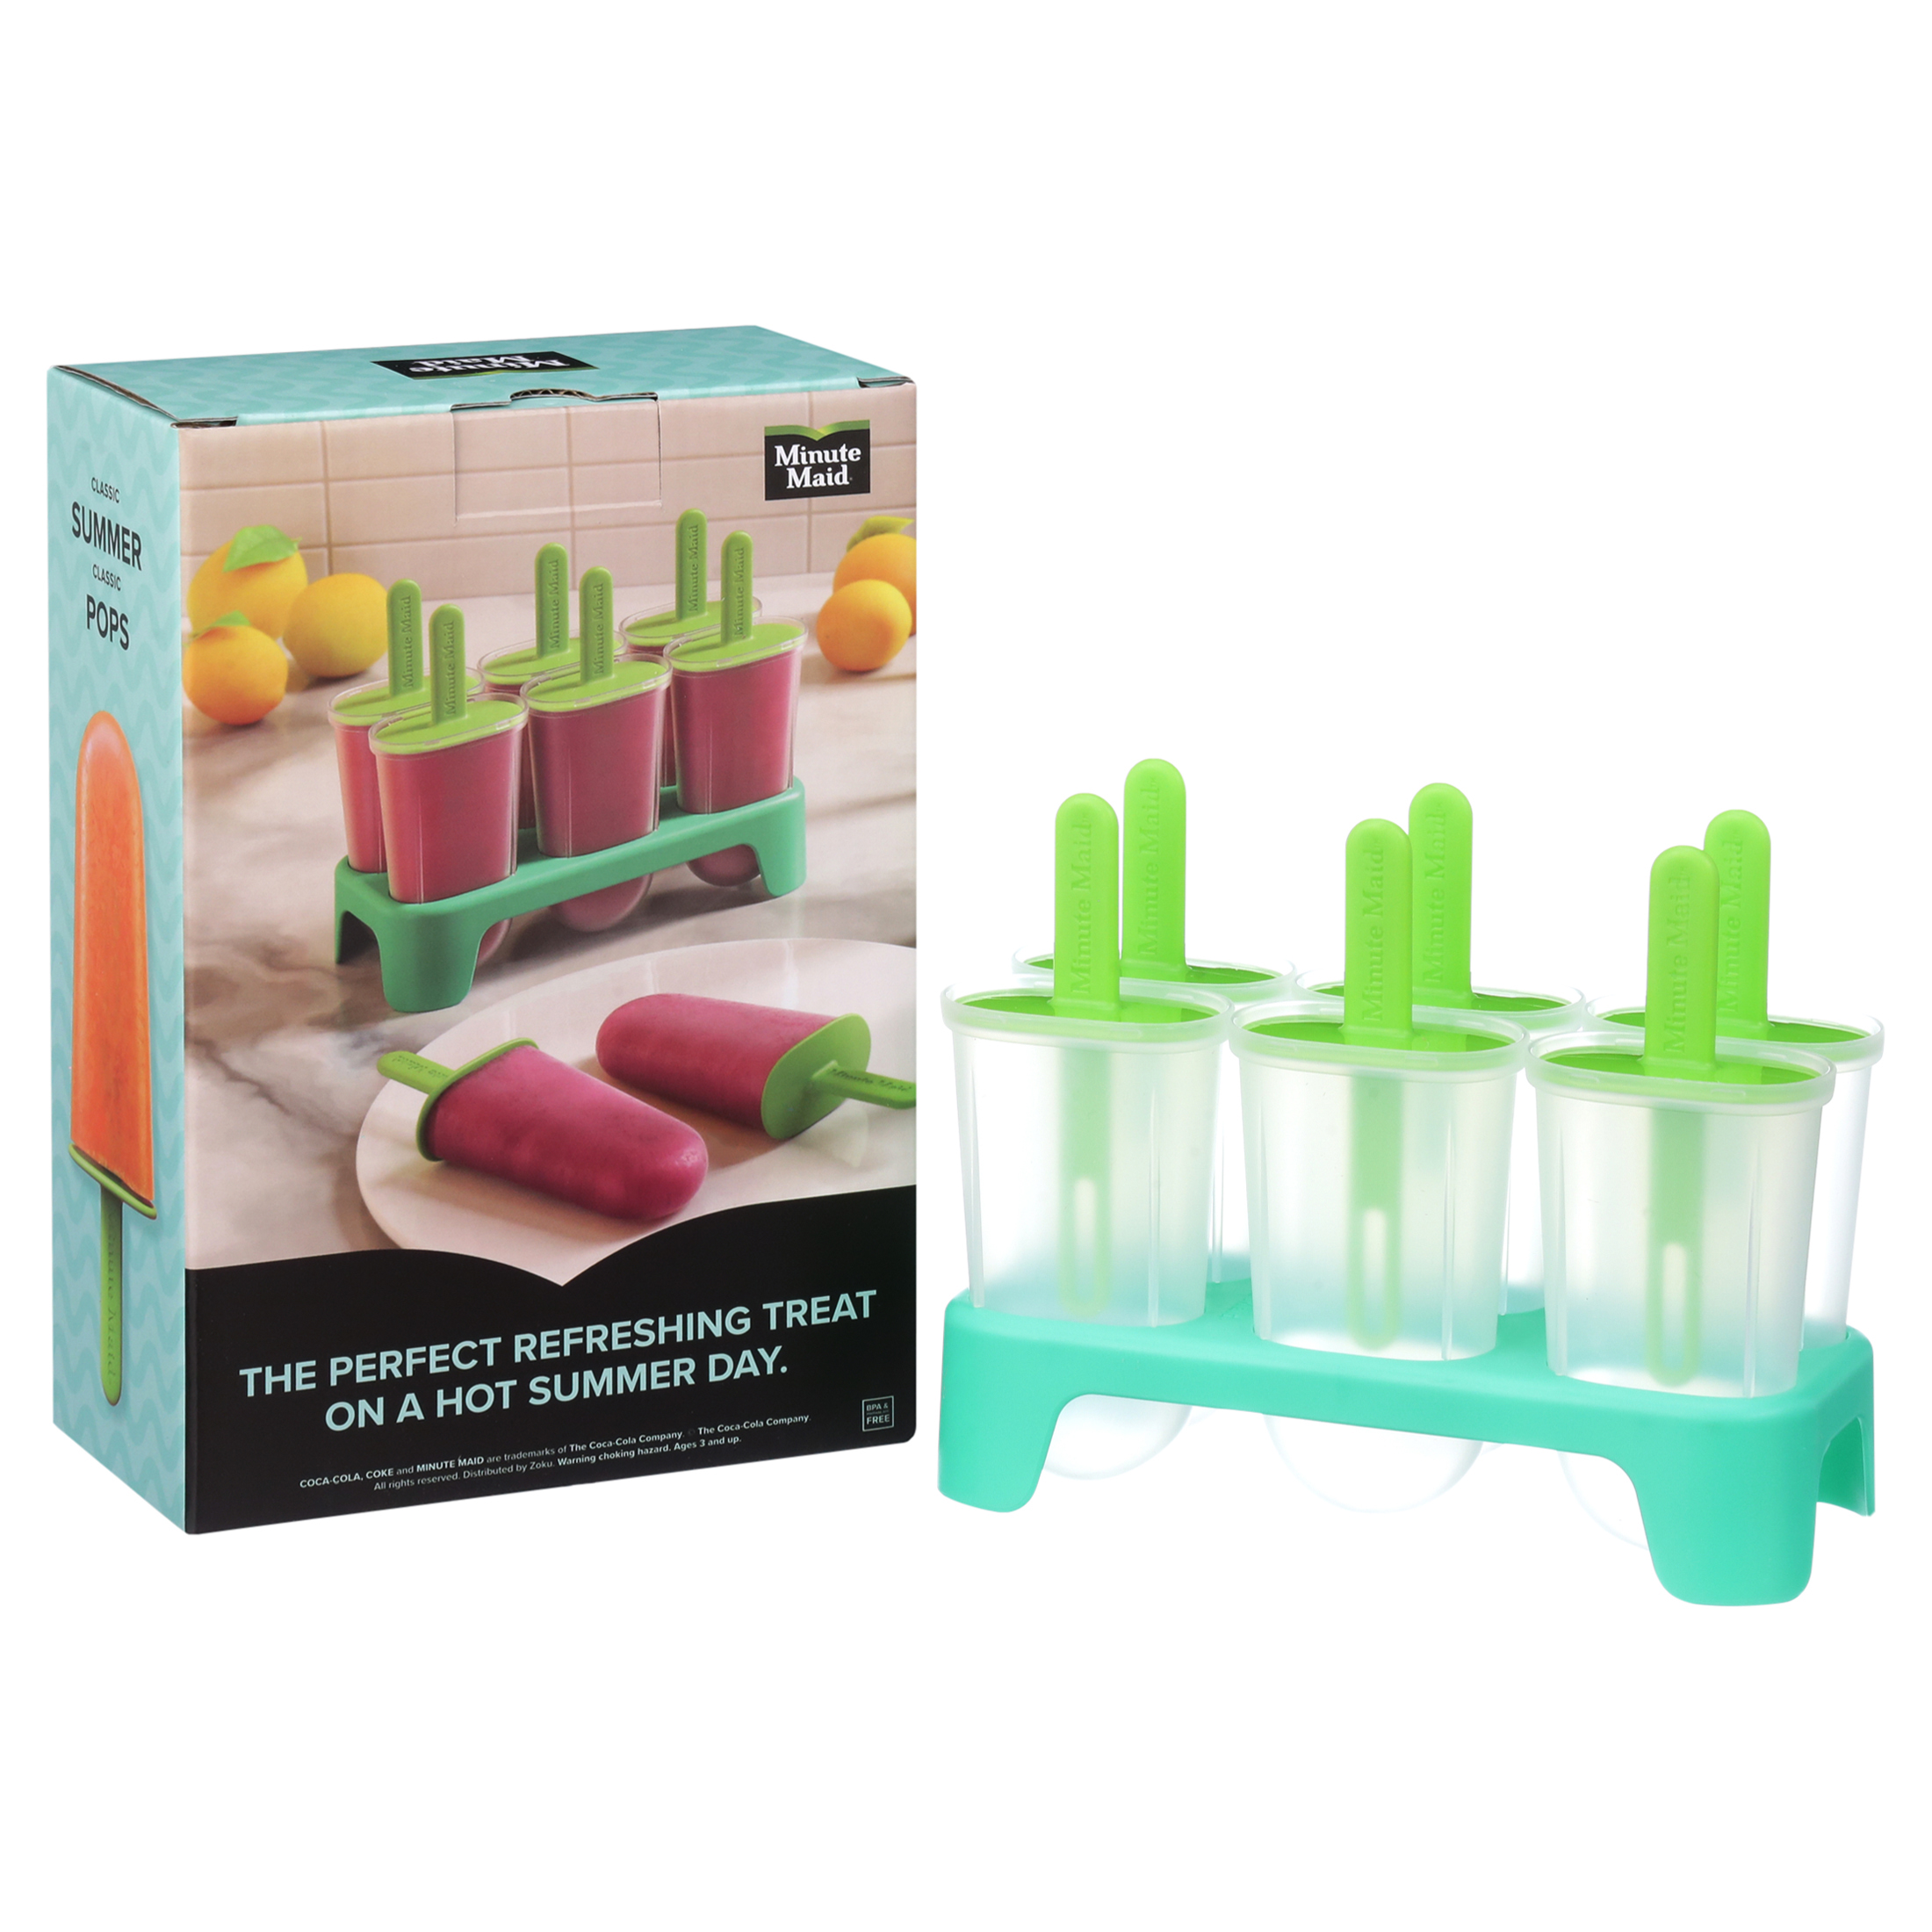 Minute Maid Set of 3 Ice Pop Molds - 1 Red, 1 Teal, 1 Purple - image 3 of 8